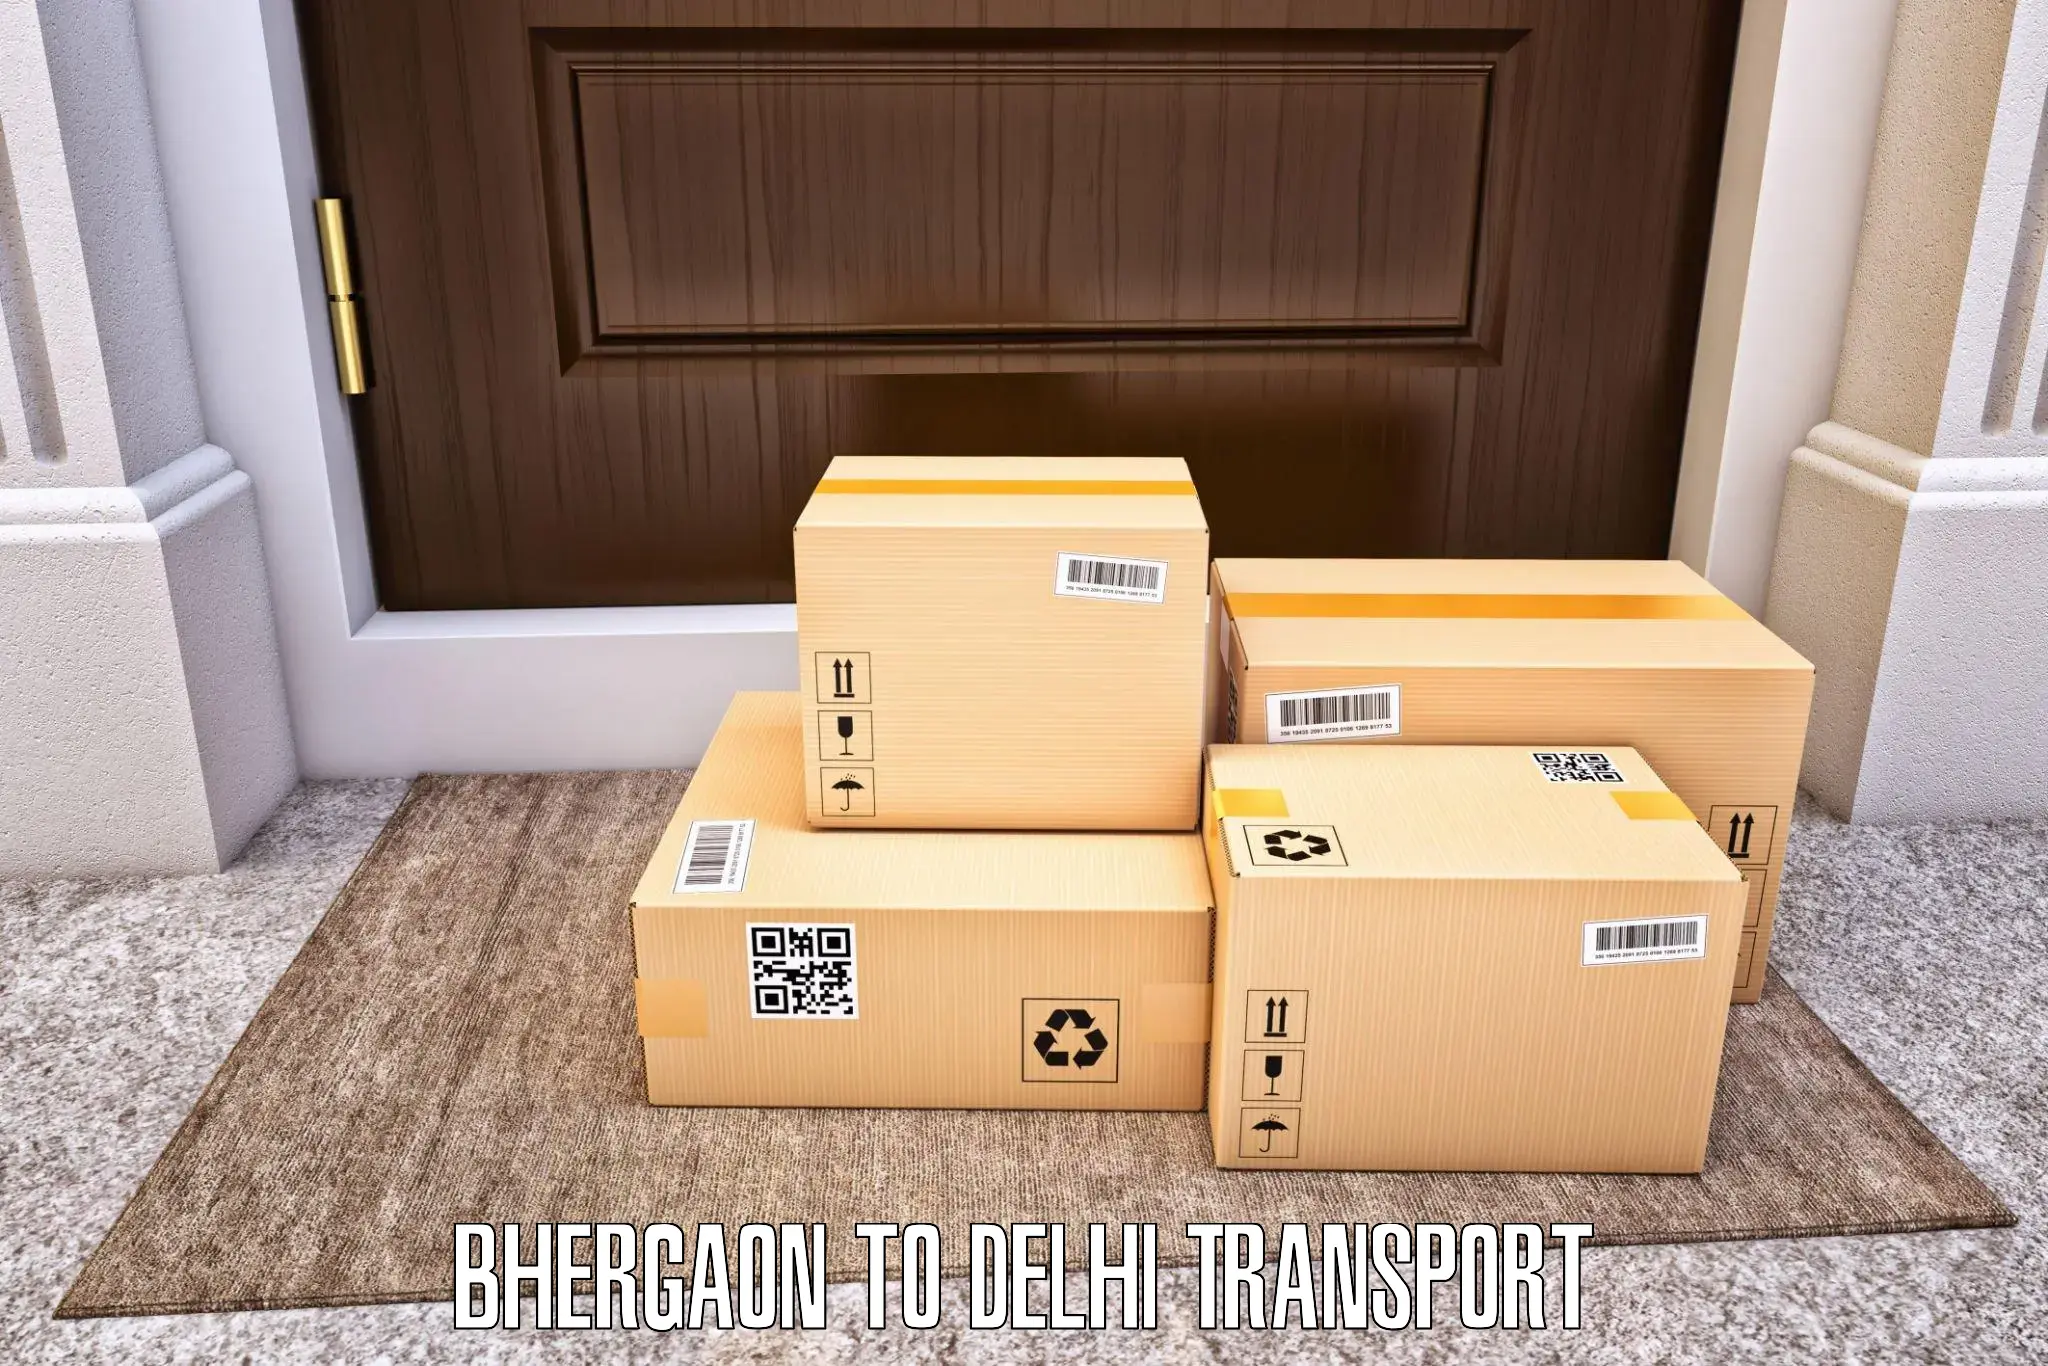 Nationwide transport services Bhergaon to NCR